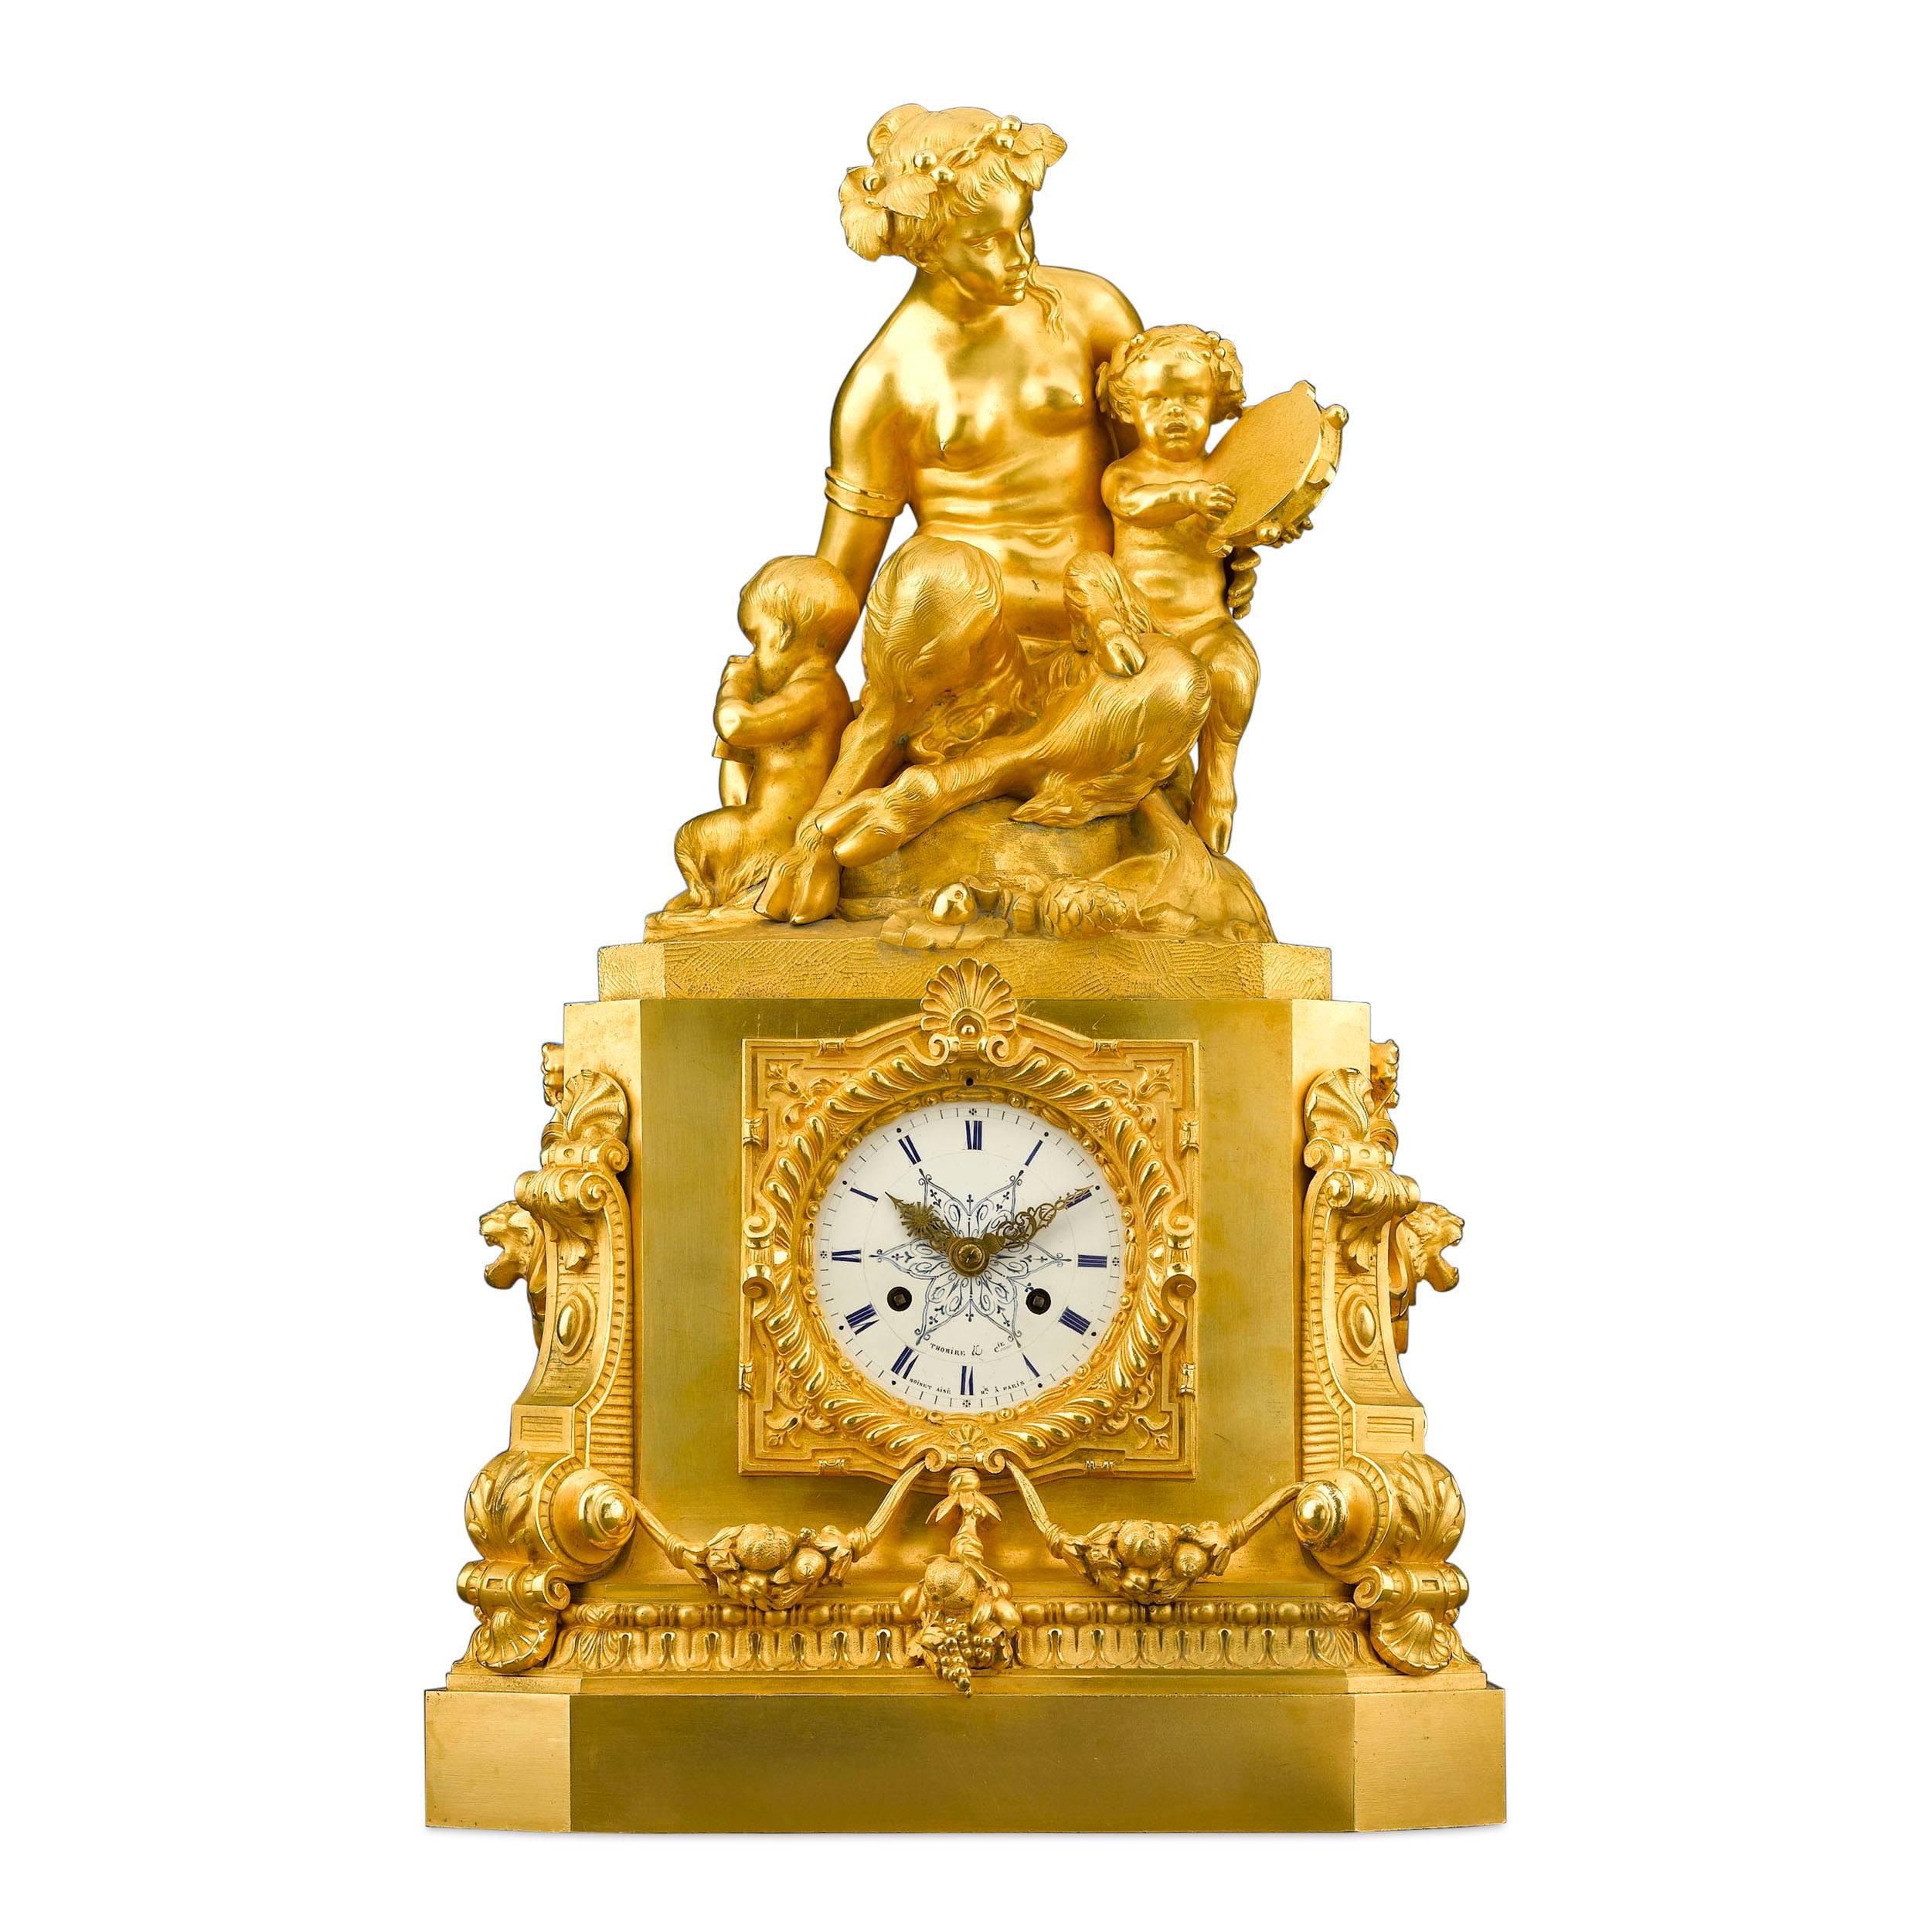 French Mantel Clock by Thomire & Moinet